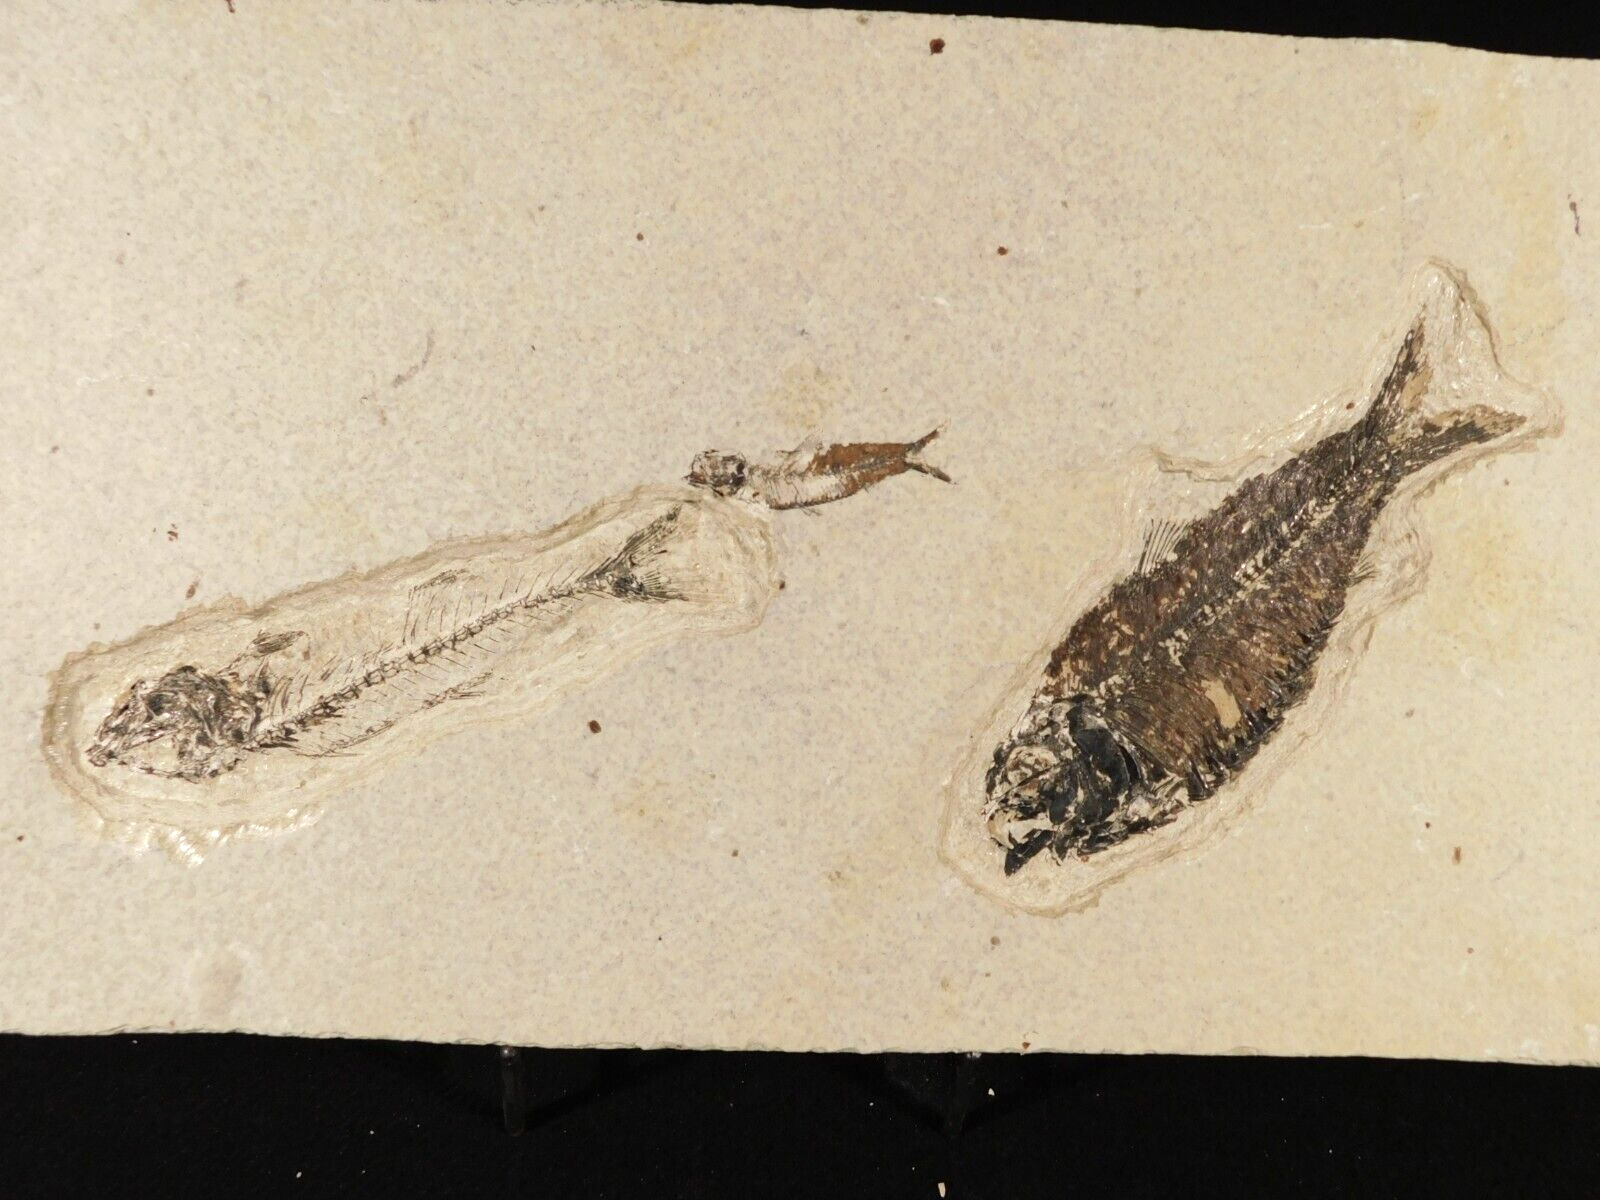 TWO Different Species Mioplosus and Knightia FISH Fossils From Wyoming 1484gr